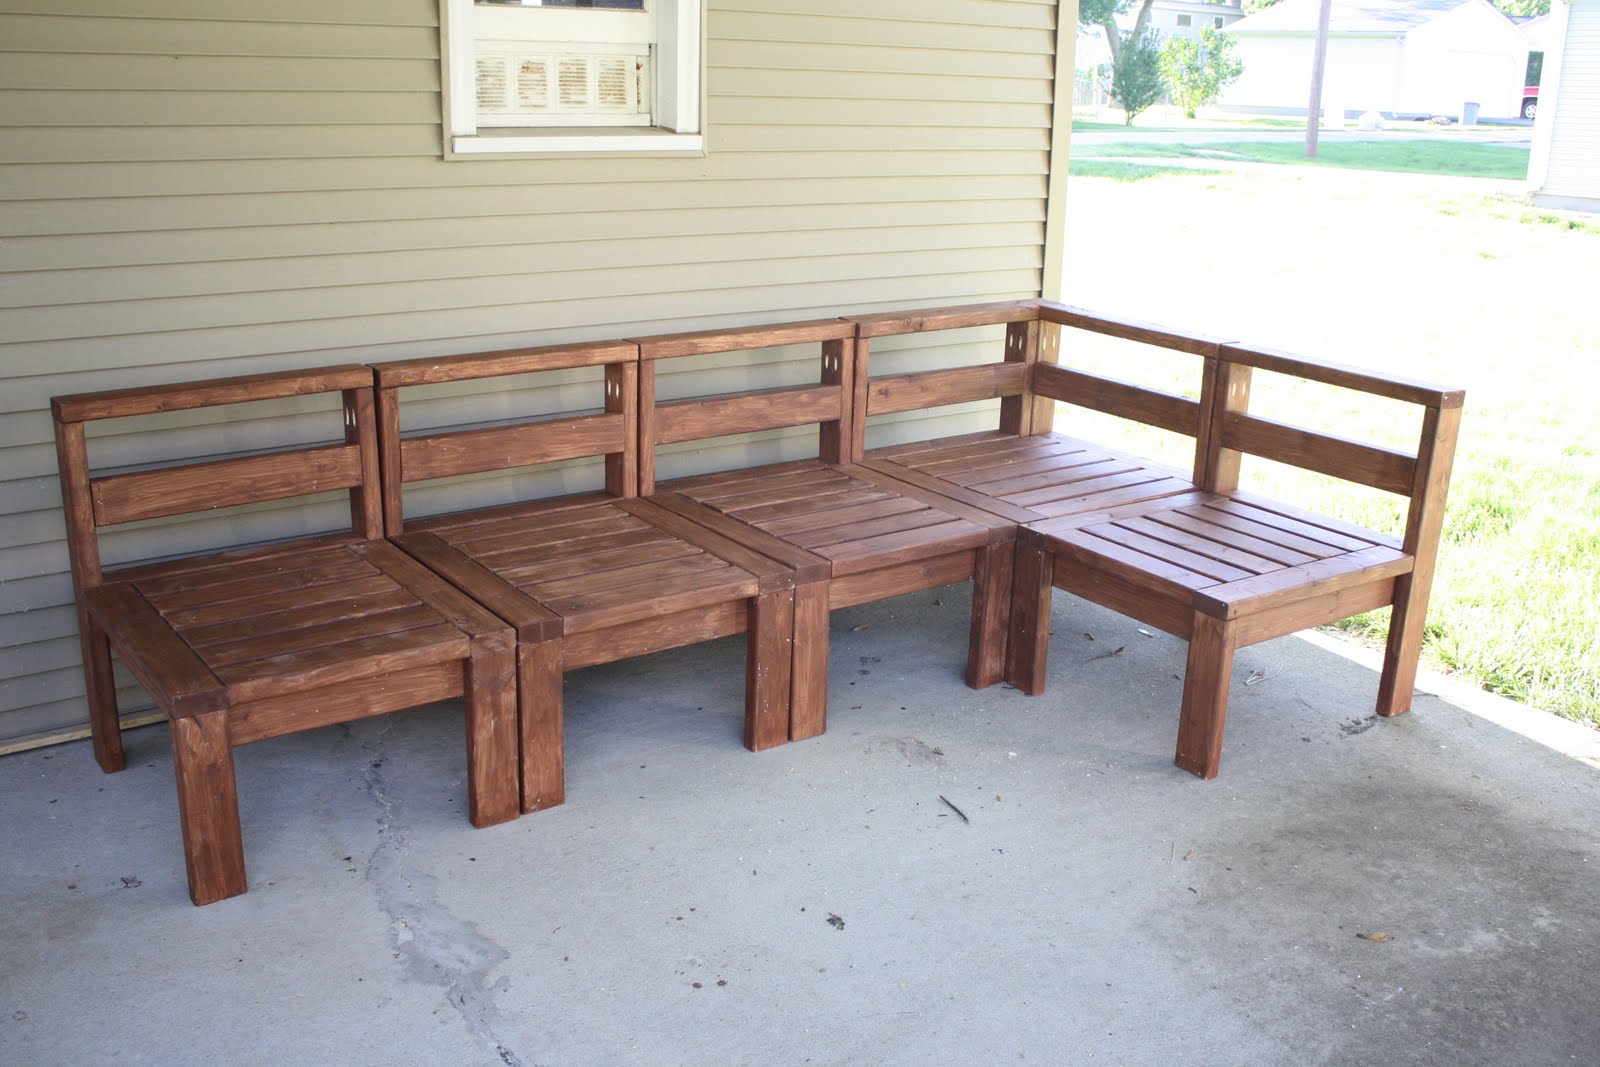 2x4 Outdoor Furniture Plans All About Furniture